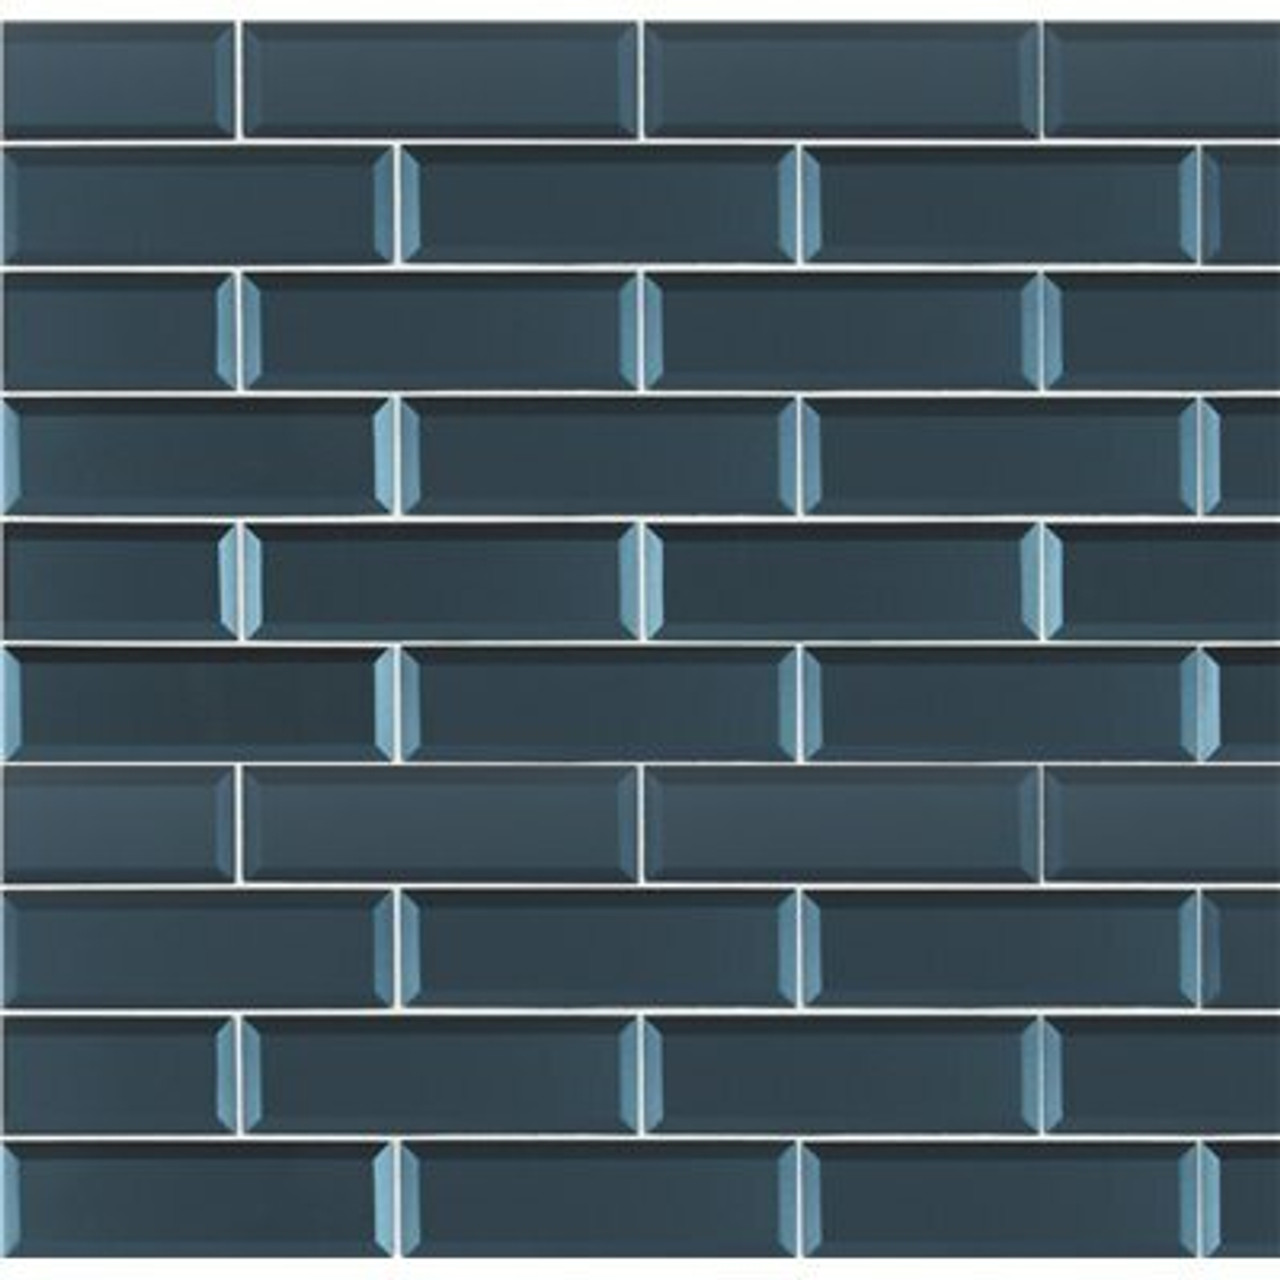 Msi Tahiti Blue Beveled 2.5 In. X 8 In. X 8 Mm Mixed Glass Subway Tile (5.6 Sq. Ft. / Case)